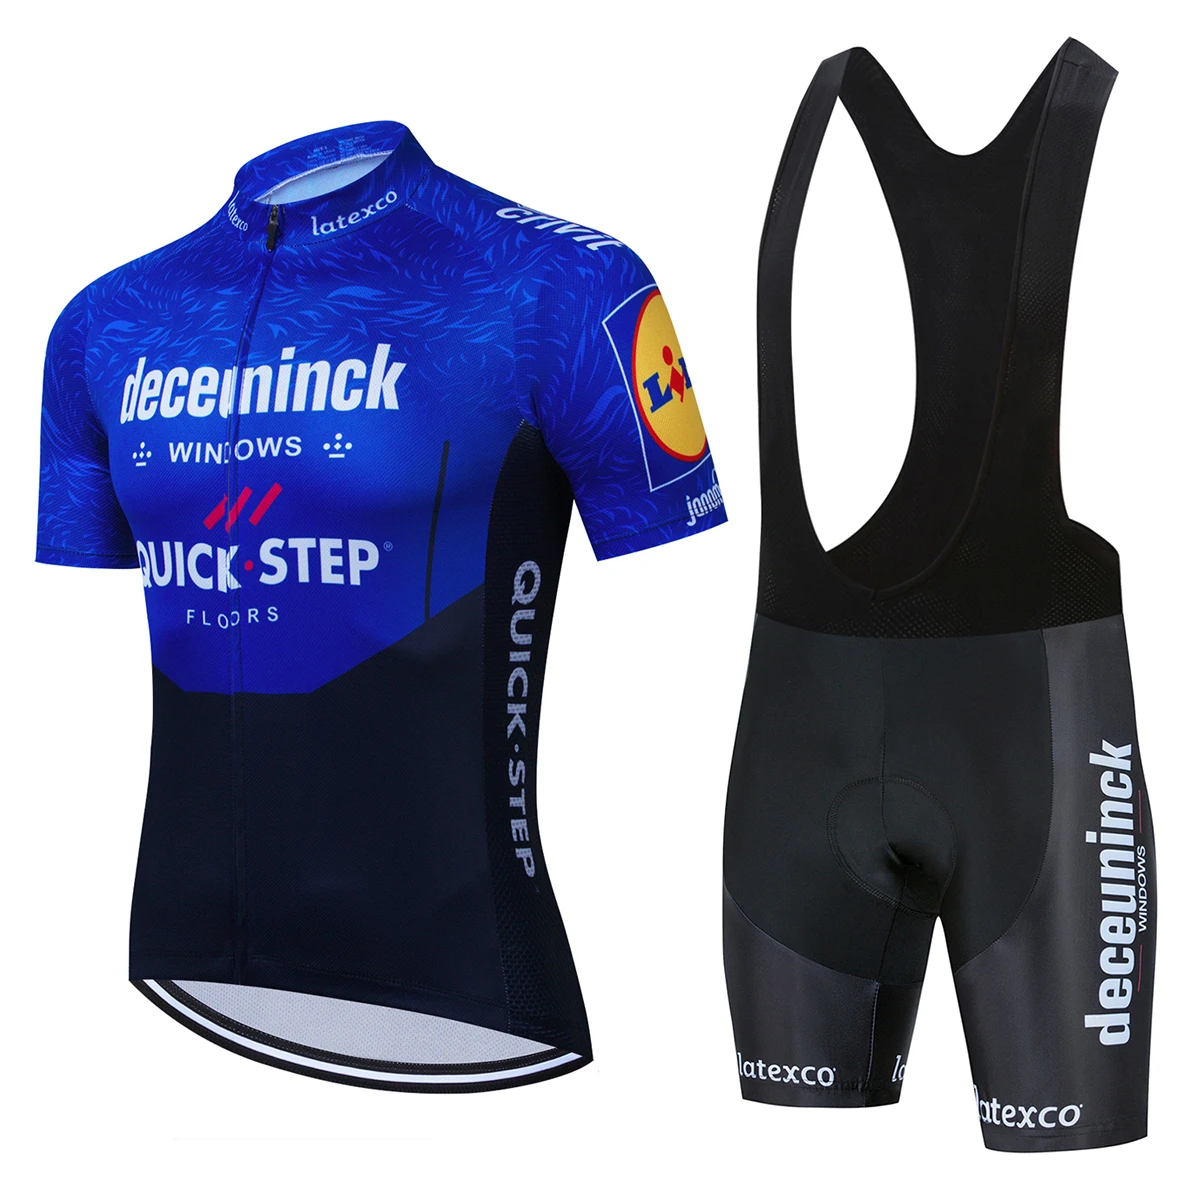 2021 New Quick Step Cycling Jersey Summer Set Team Cycling Clothing Road Bike Suit Bicycle Bib Shorts MTB Maillot Ciclismo Ropa